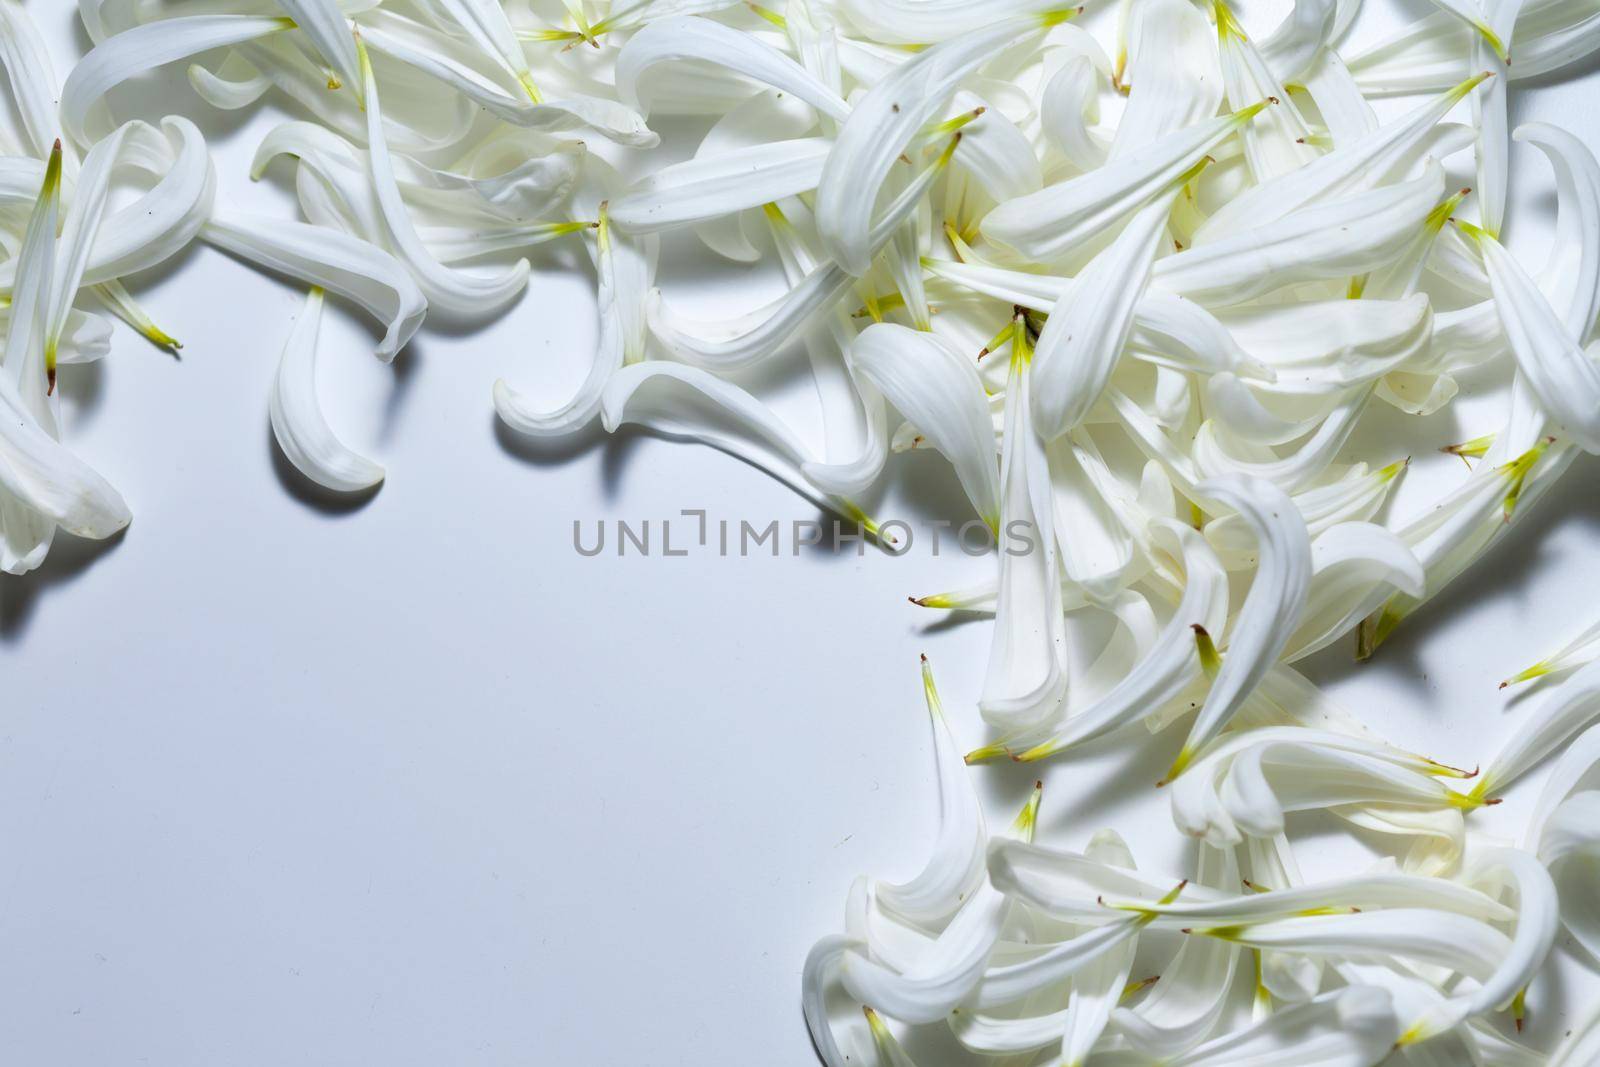 an empty space bounded by white petals by zebra